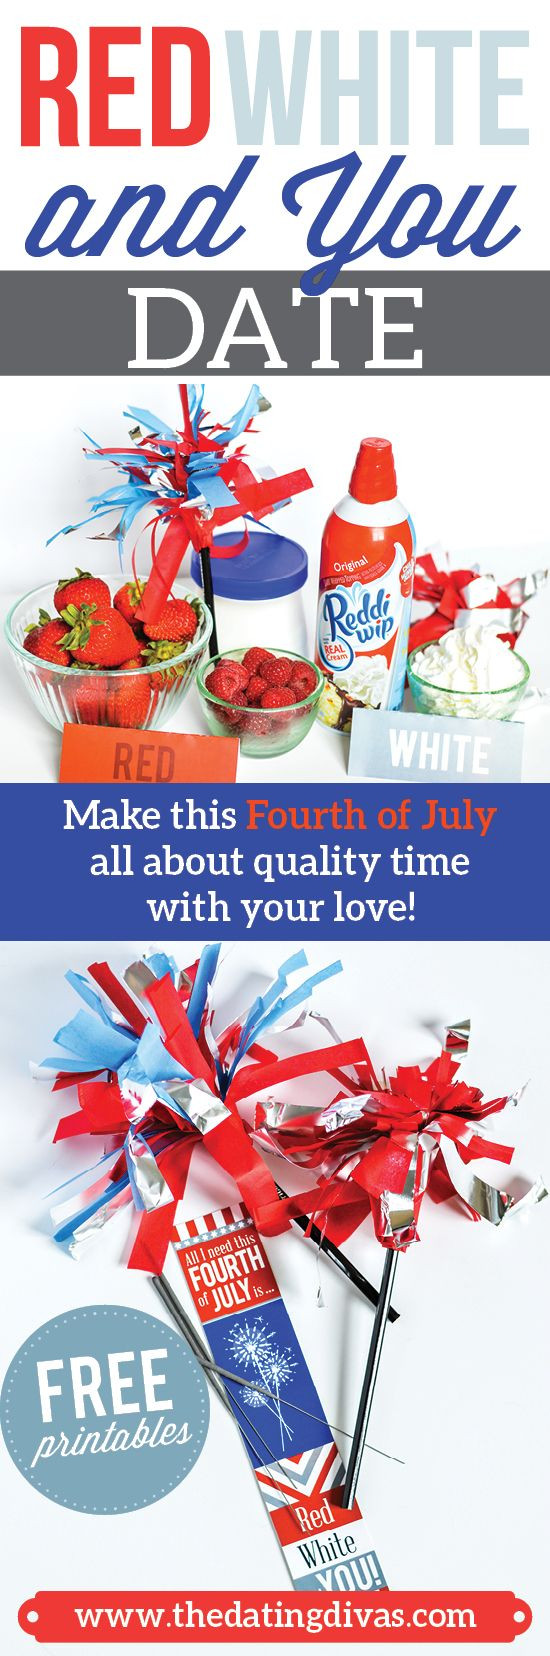 4th Of July Vacation Ideas
 904 best Holidays 4th of July images on Pinterest